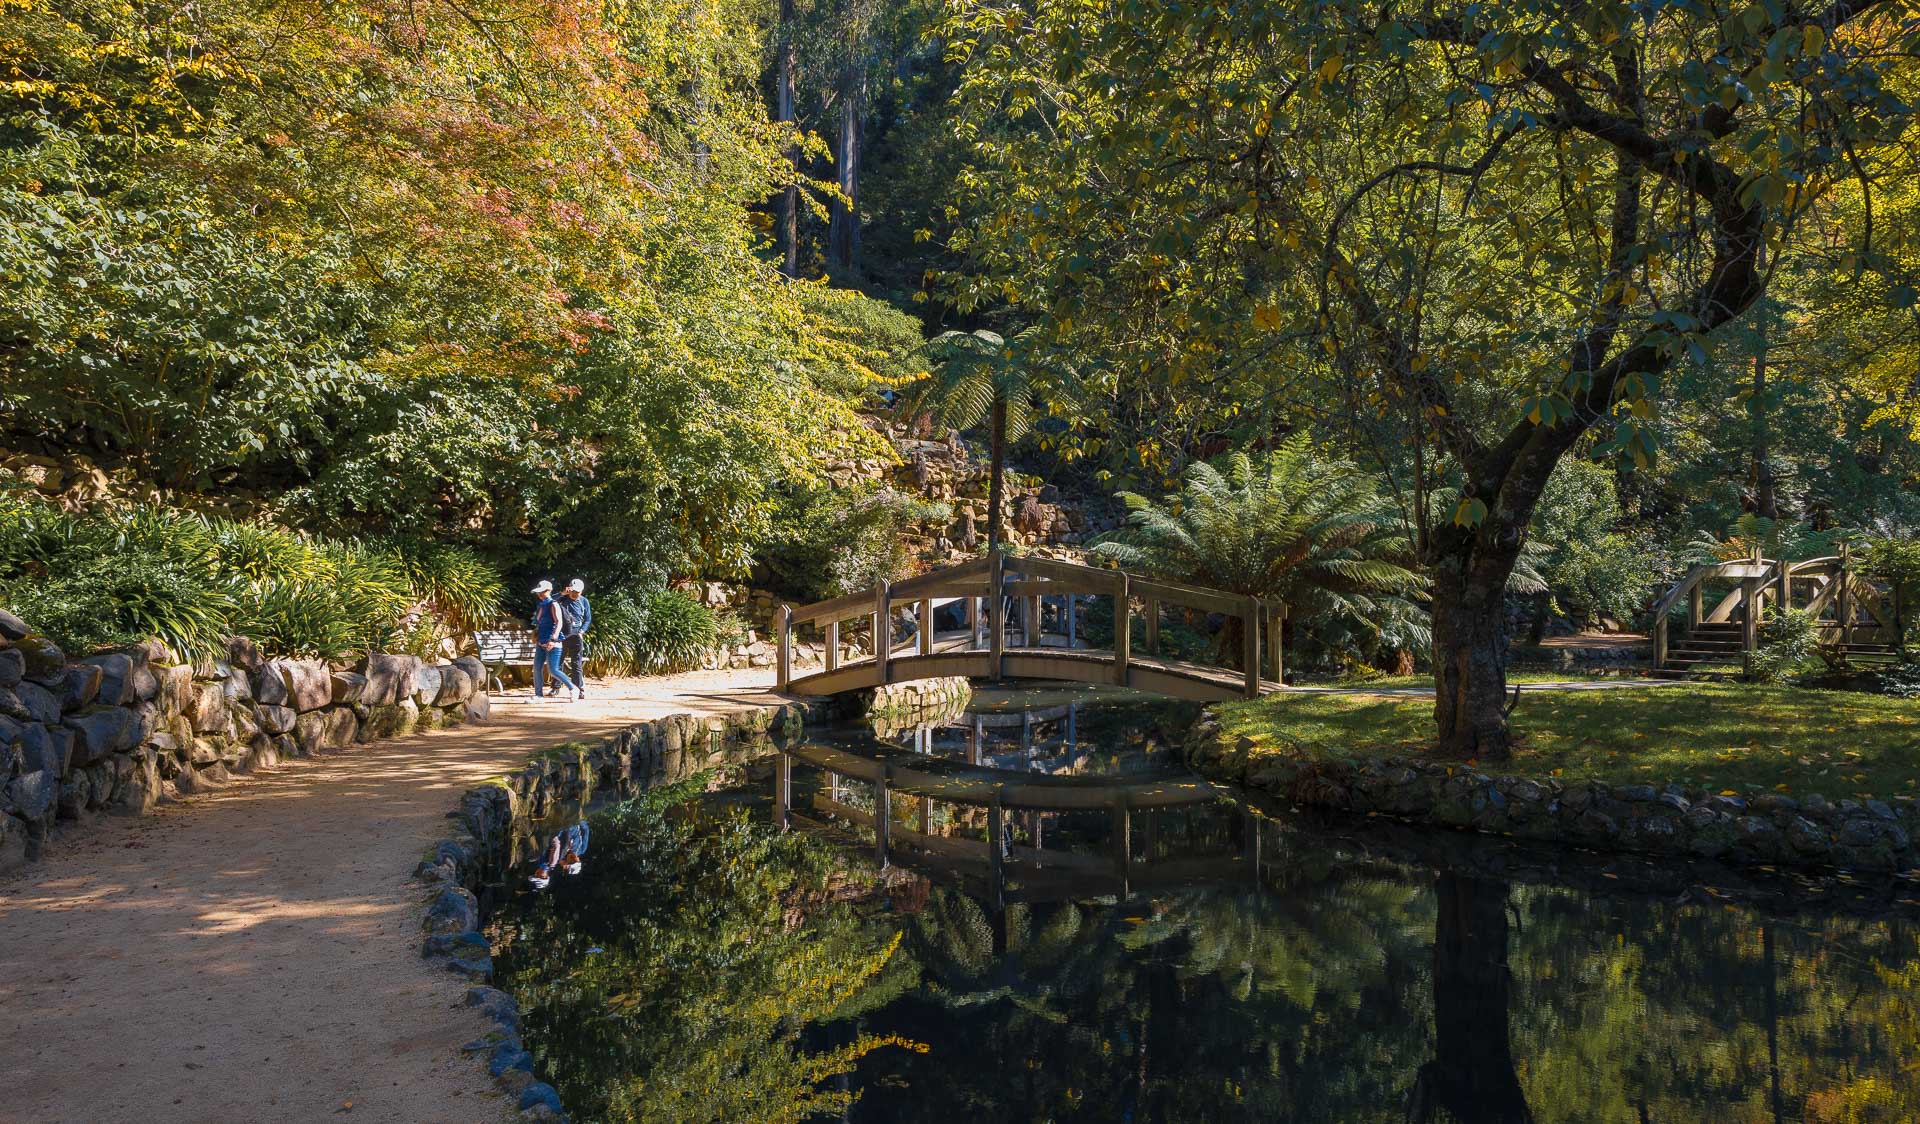 People walking through paths on a green mature European garden, surrounded by water features. 